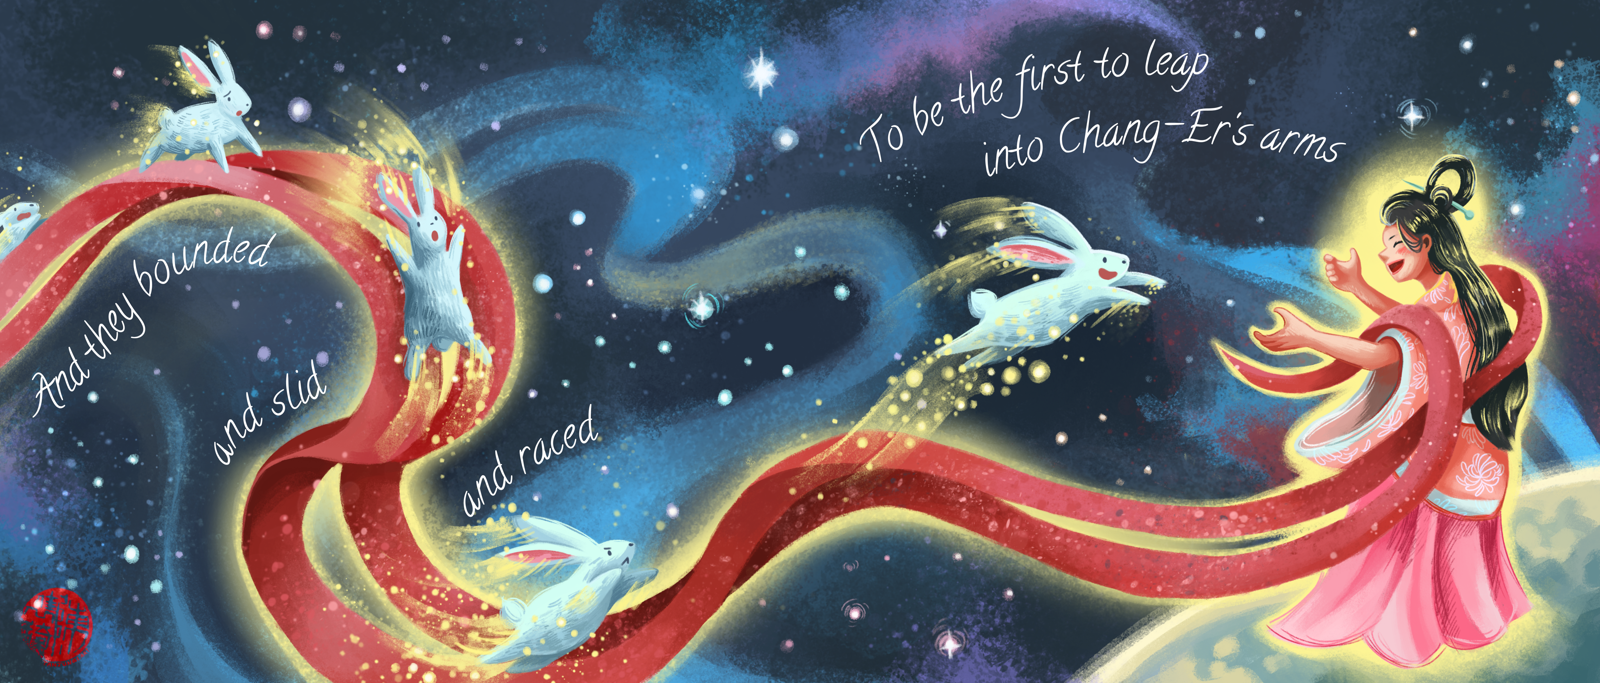 A digital painting of jade rabbits racing along Chang-Er's silken sash towards the moon, to leap into Chang-Er's embrace. Chang-Er is standing on the moon on the bottom-right corner, while her sash flows across the picture against a galactic backdrop with colorful nebulae and twinkling stars. Chang-Er and her sash are aglow with a deity's light, while the celestial jade rabbits leave golden trails and balls of light behind them as they bound forward. The leading rabbit is just about to leap into Chang-Er's arms, which are outstretched. The second rabbit is bounding up with a determined expression on his face, while the third is sliding down a section of the silken sash, the fourth is standing before the slide in hesitation, and the fifth is trying hard to catch up.